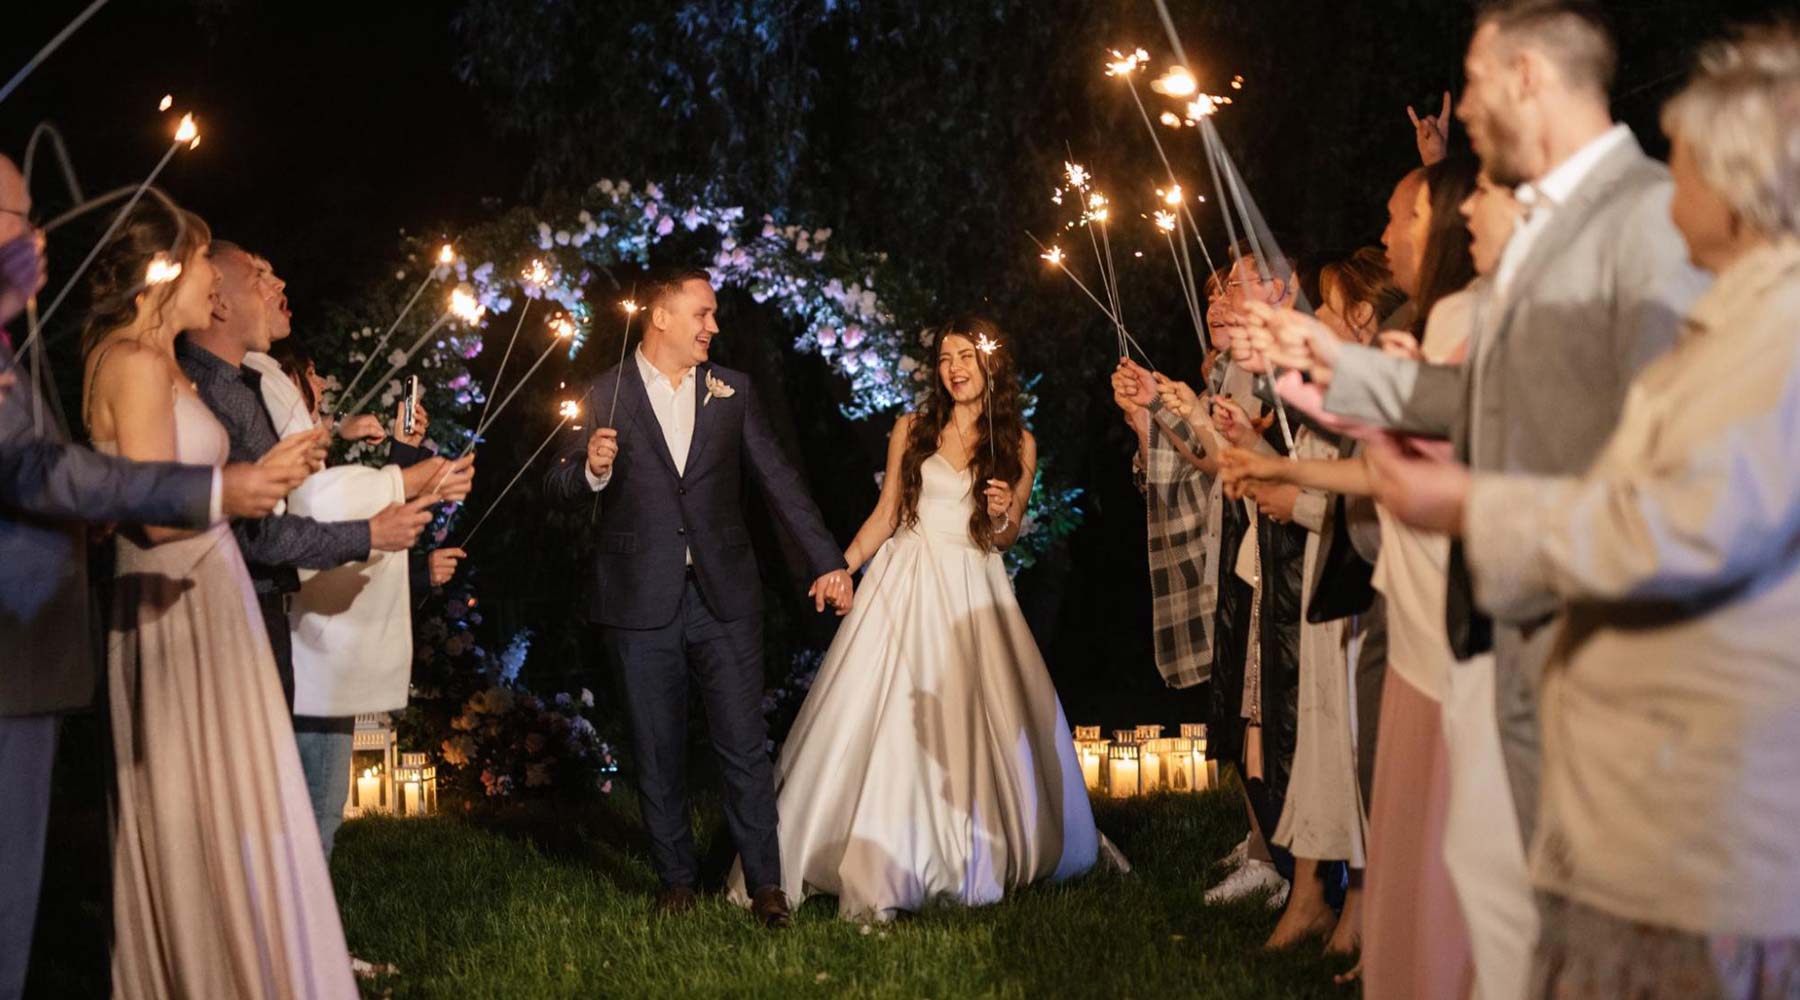  their bridal party at a night wedding. Each member holds a sparkler firework.